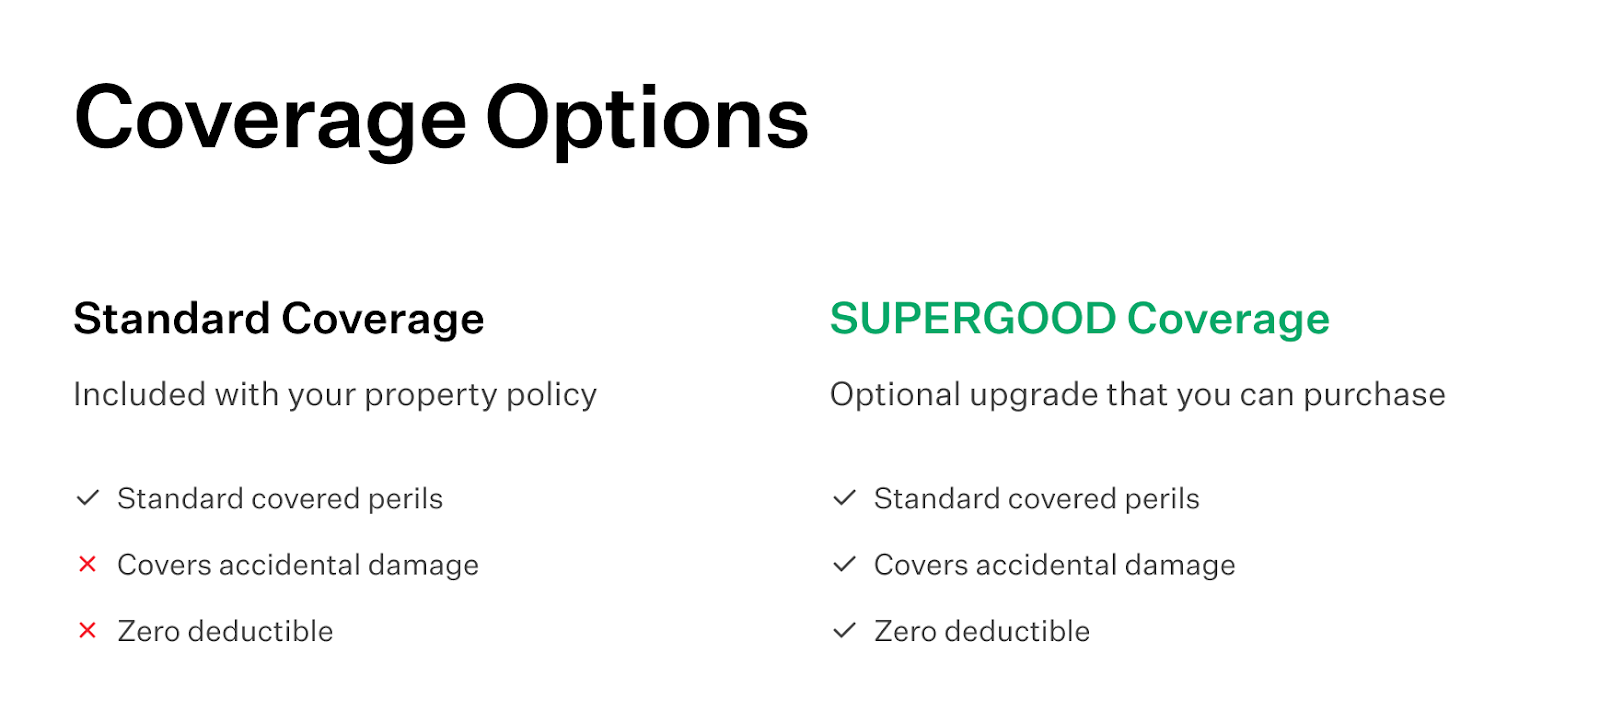 Goodcover’s renters’ insurance coverage options.